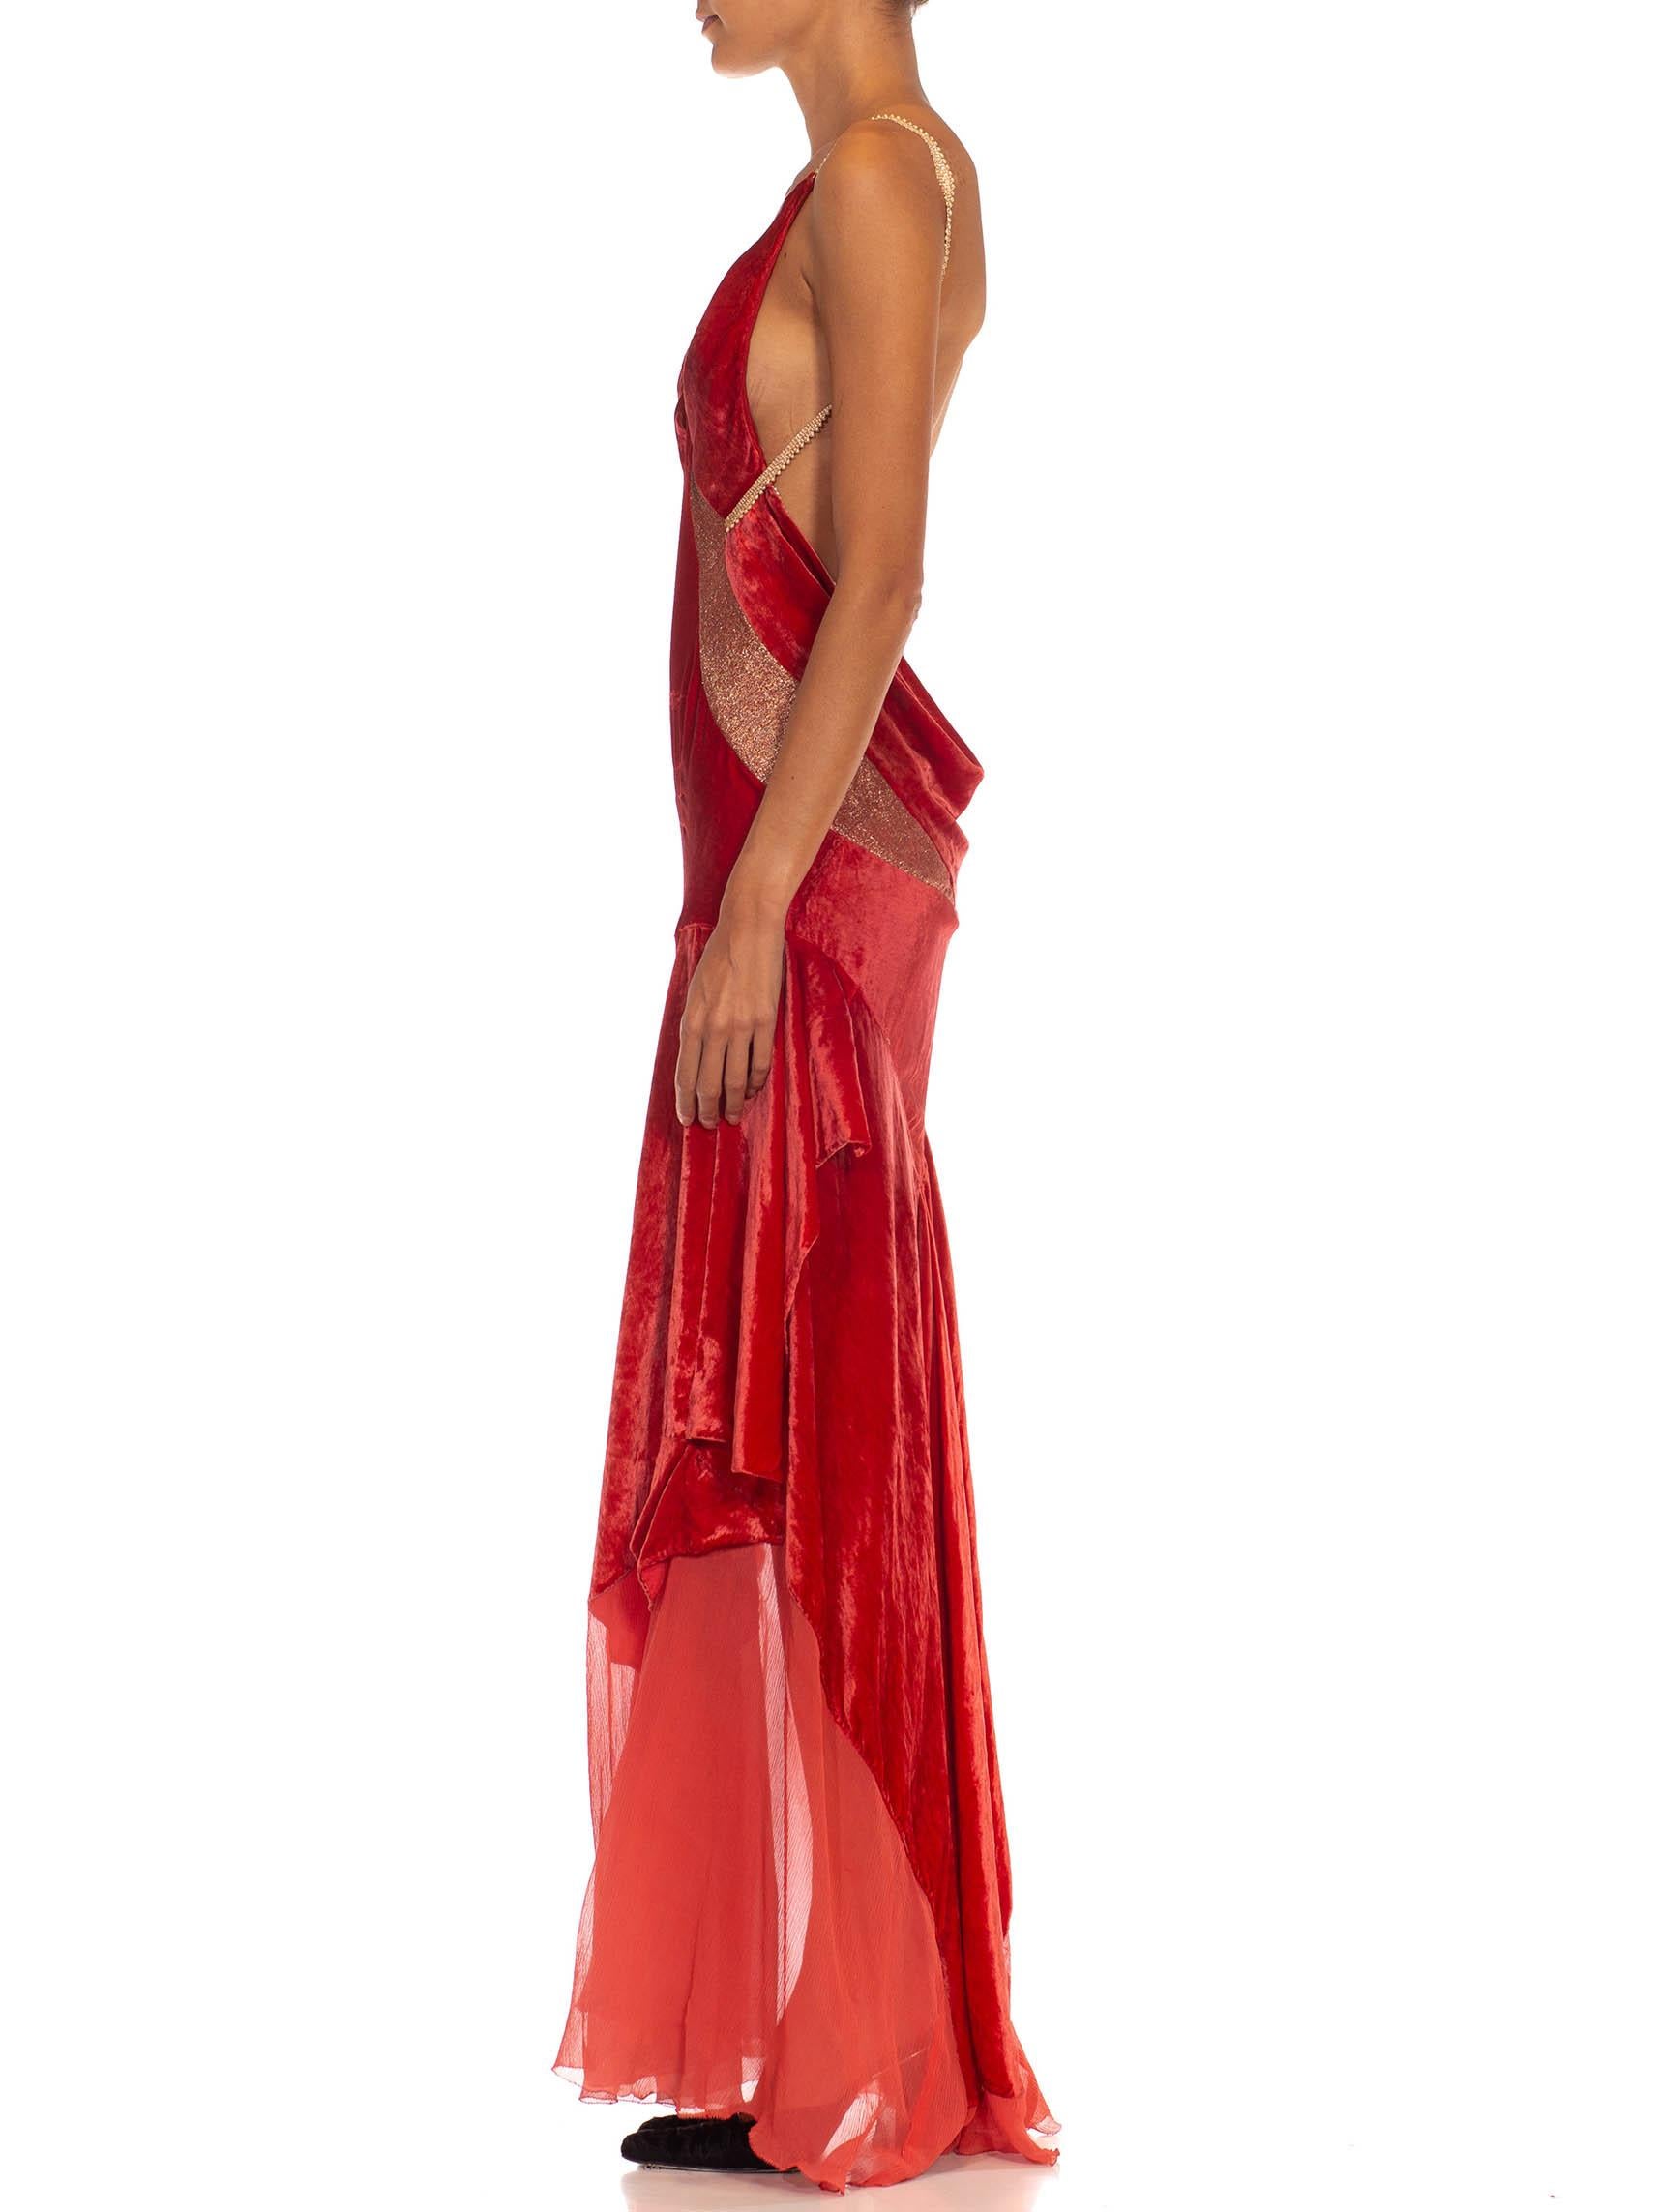 MORPHEW COLLECTION Tomato Red & Gold Antique 1920'S Silk Velvet Backless Gown
MORPHEW COLLECTION is made entirely by hand in our NYC Ateliér of rare antique materials sourced from around the globe. Our sustainable vintage materials represent over a